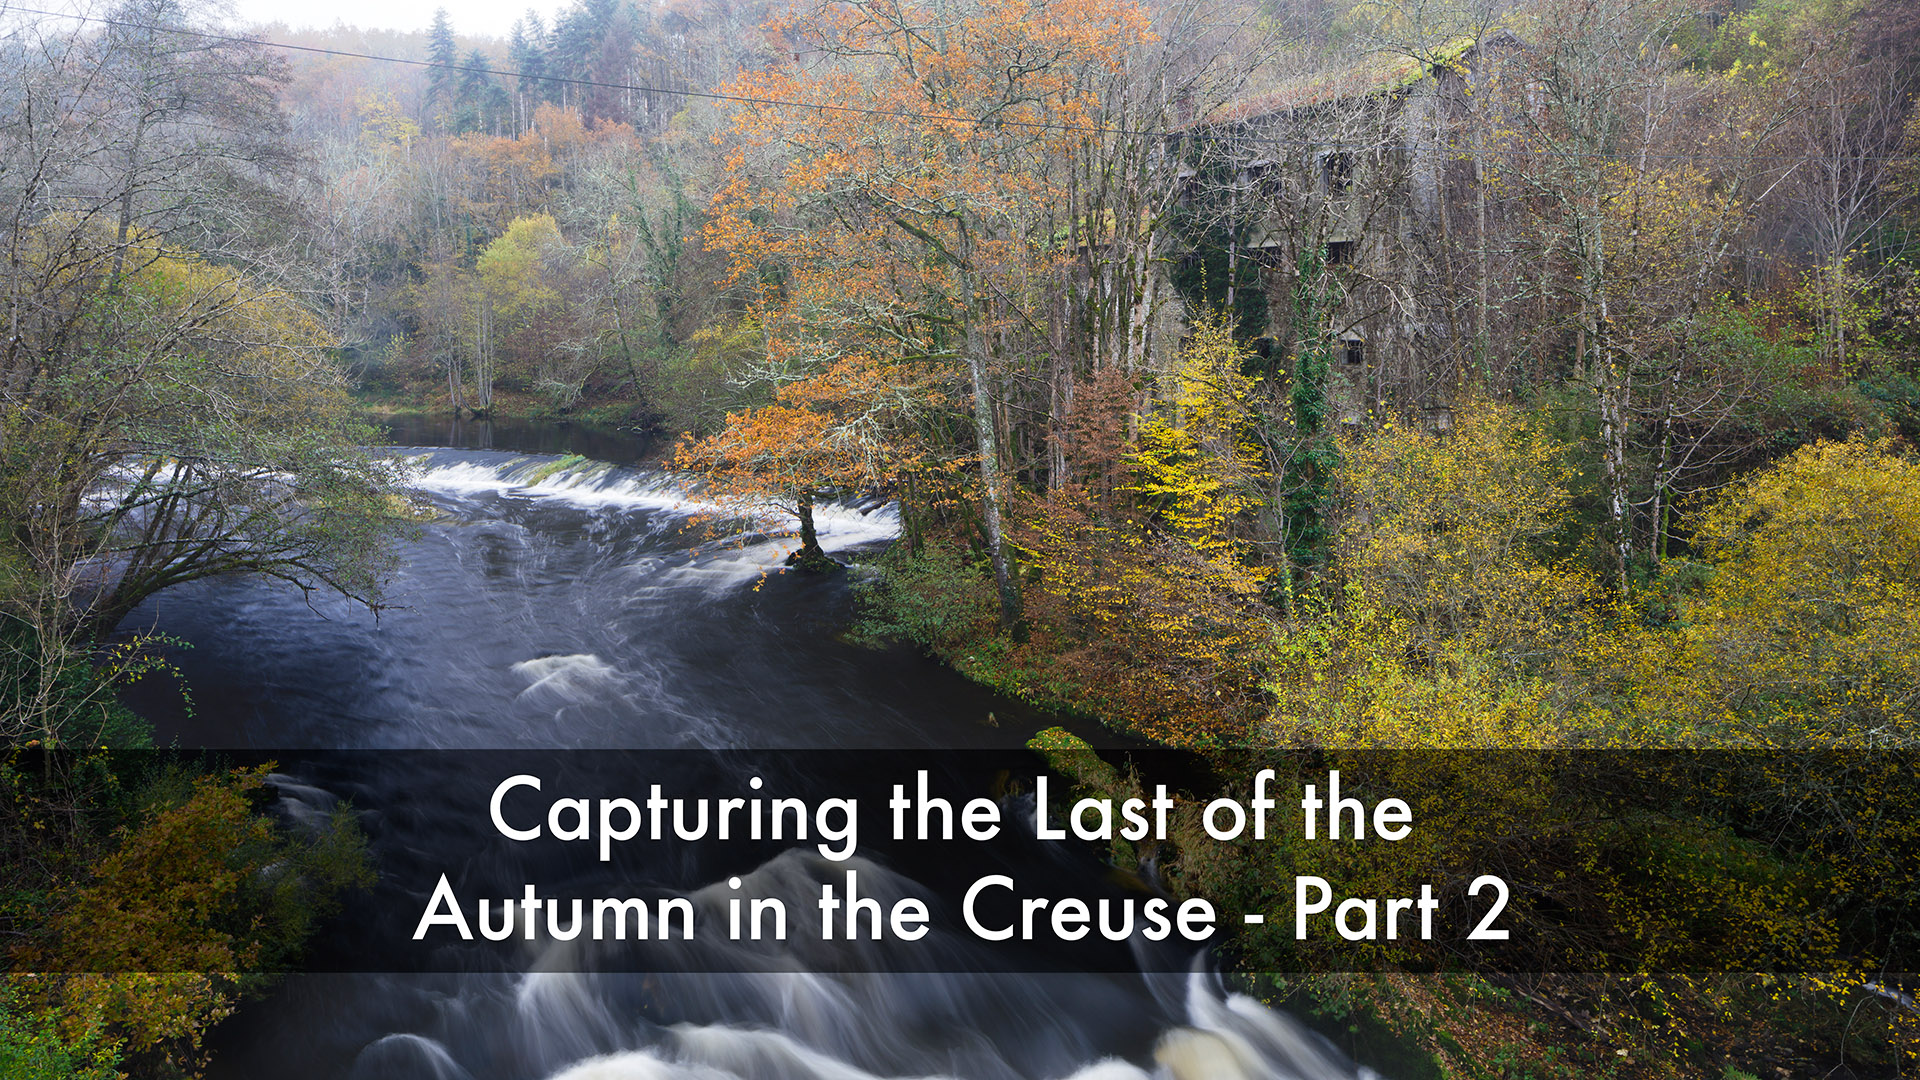 Capturing the last of the autumn in the Creuse. Part 2.